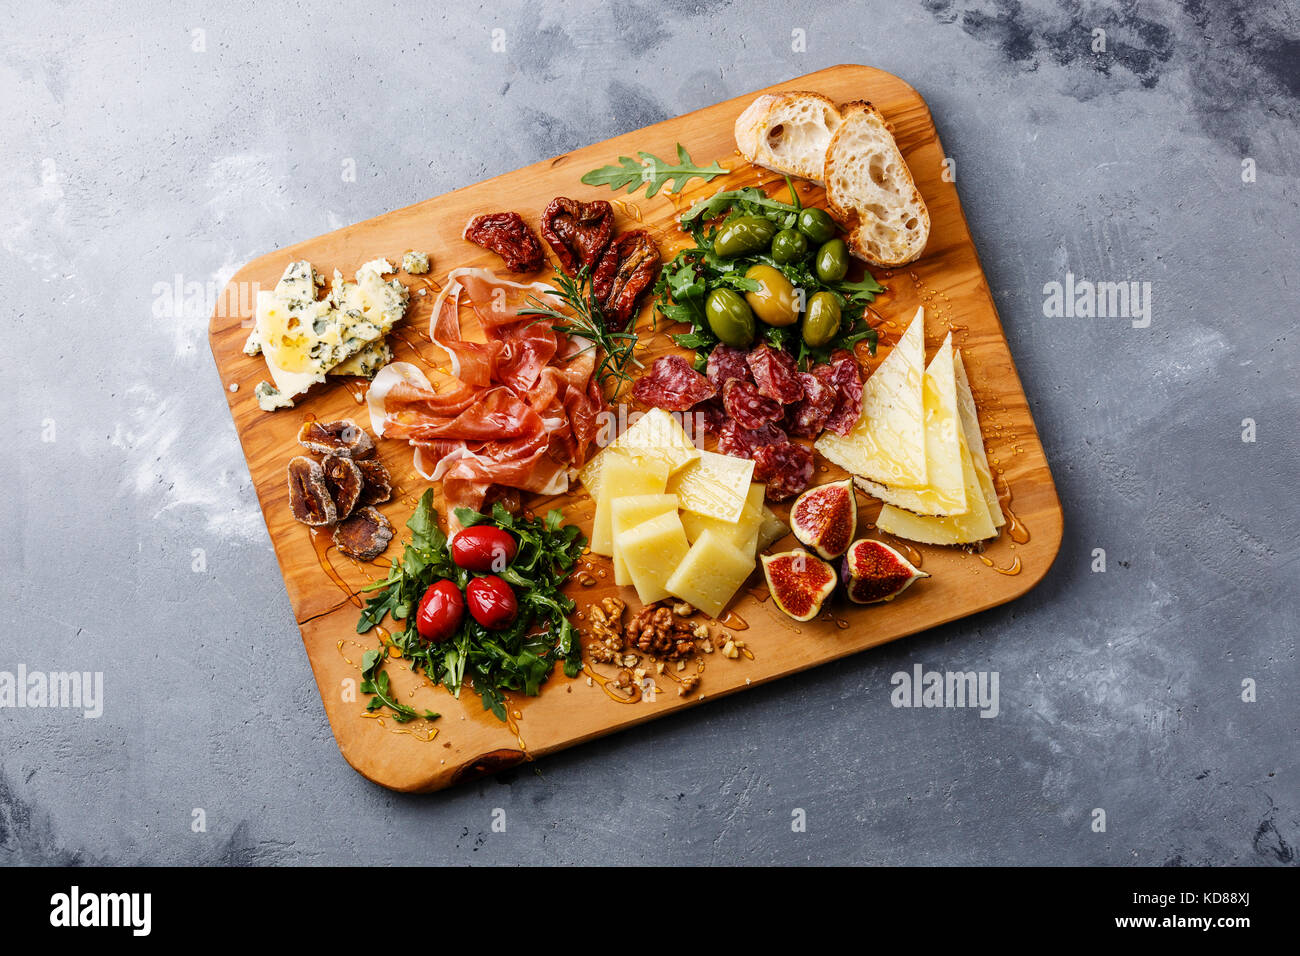 Italian snacks food with Ham, Olive, Cheese, Sun-dried tomatoes, Sausage and Bread on wooden cutting board on concrete background Stock Photo